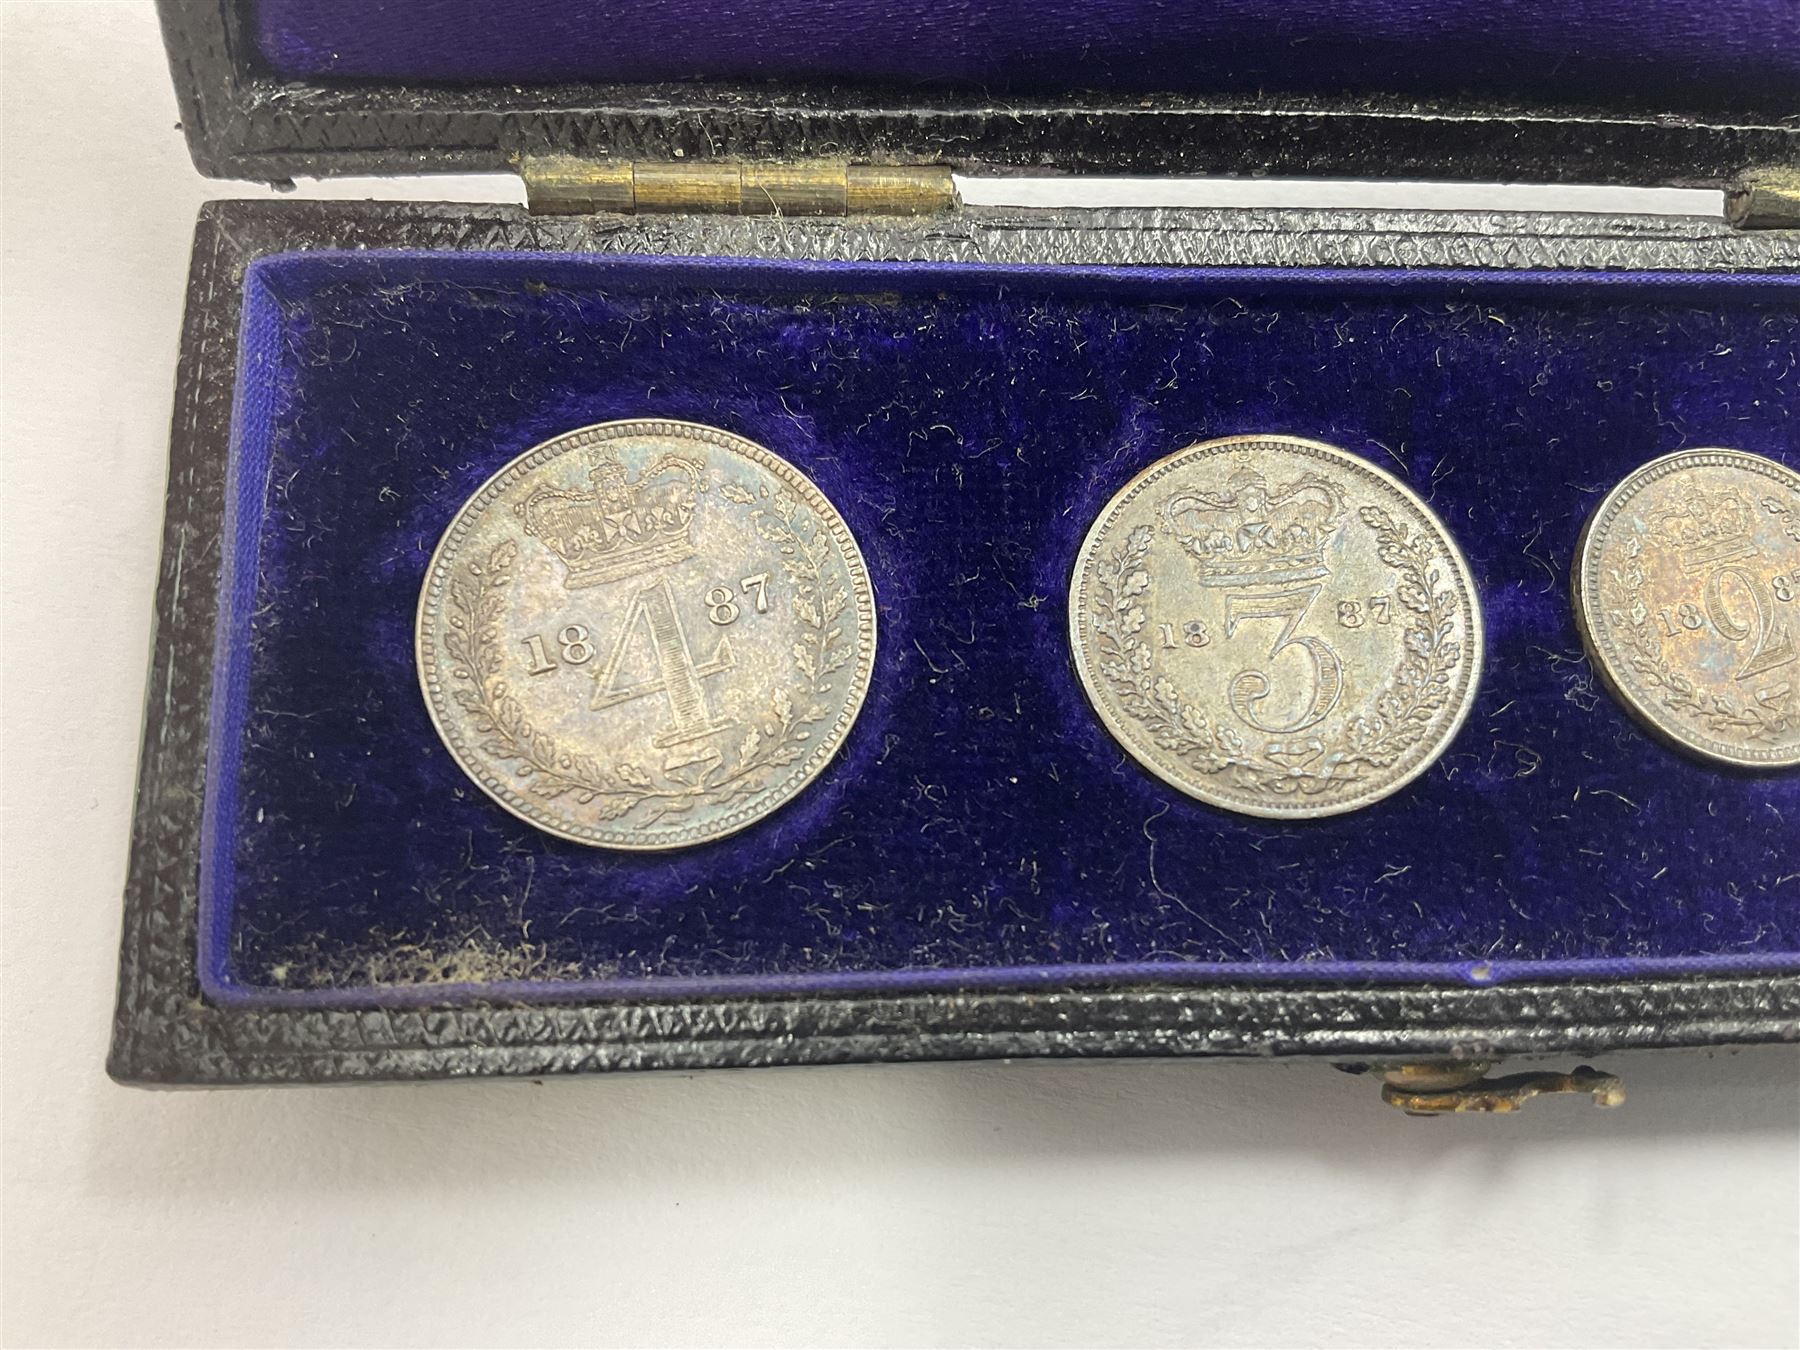 Queen Victoria 1887 maundy coin set - Image 2 of 5